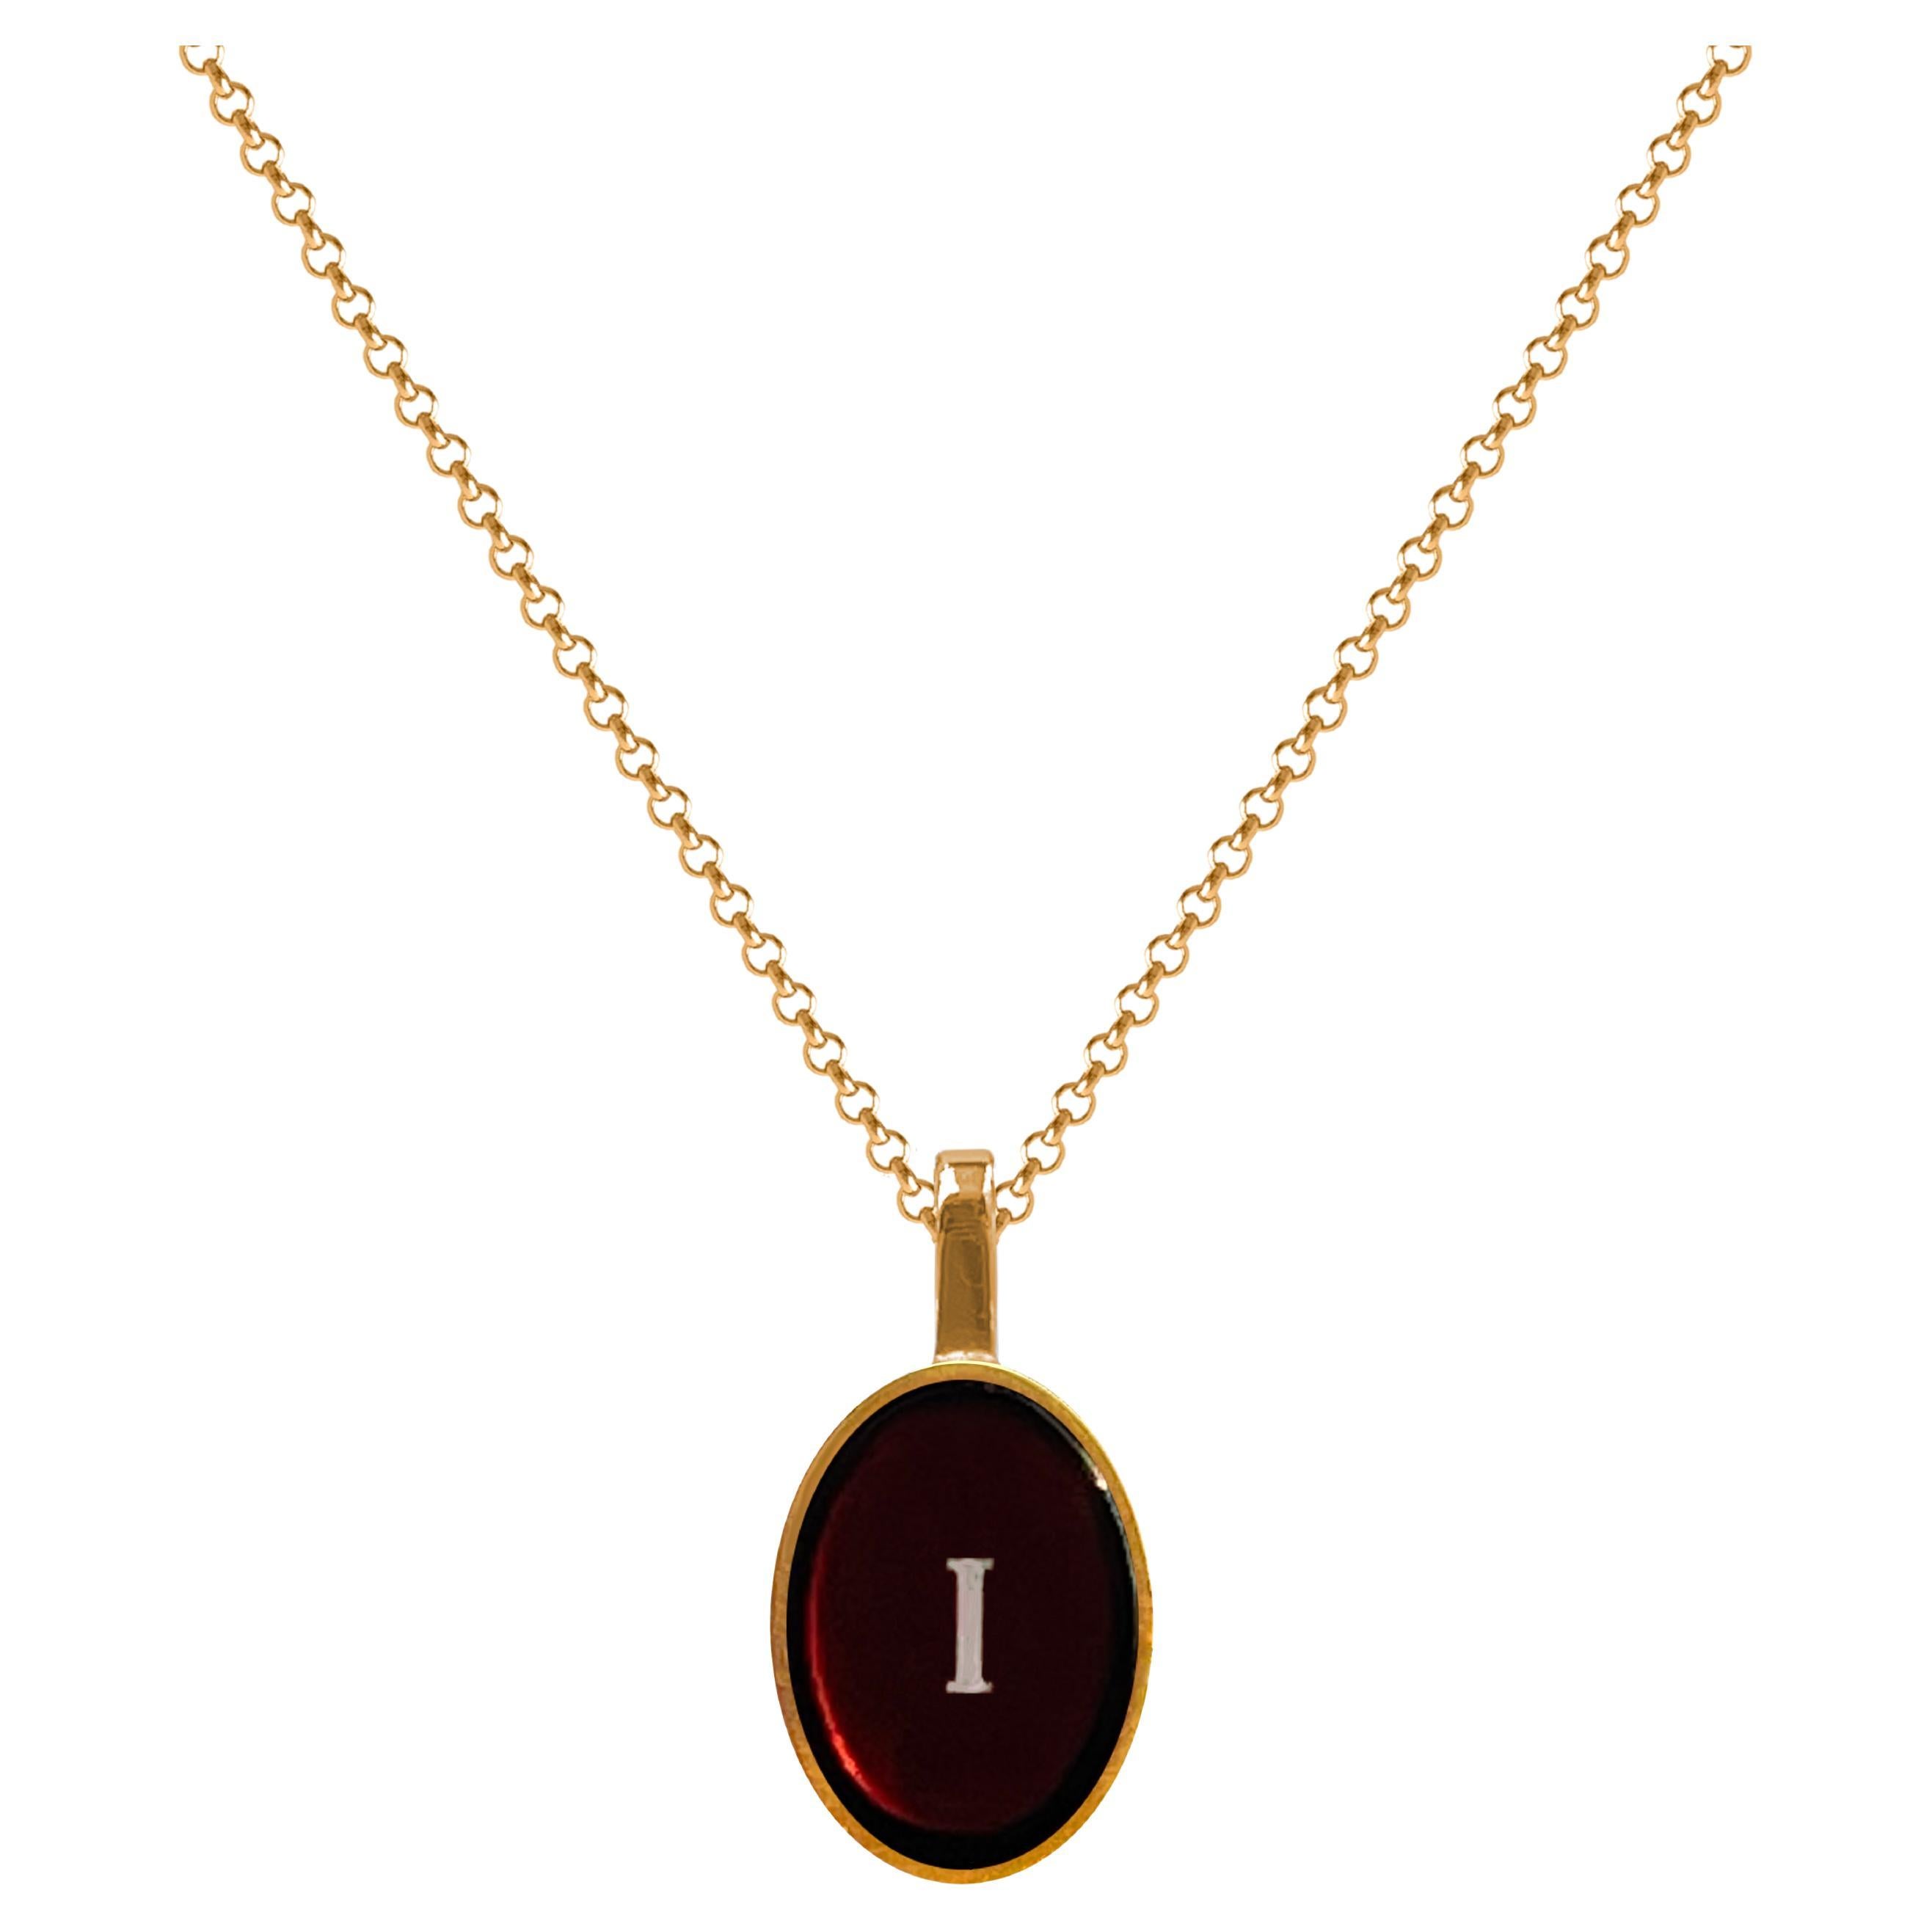 Necklace with amber pendant and name letter gold - I